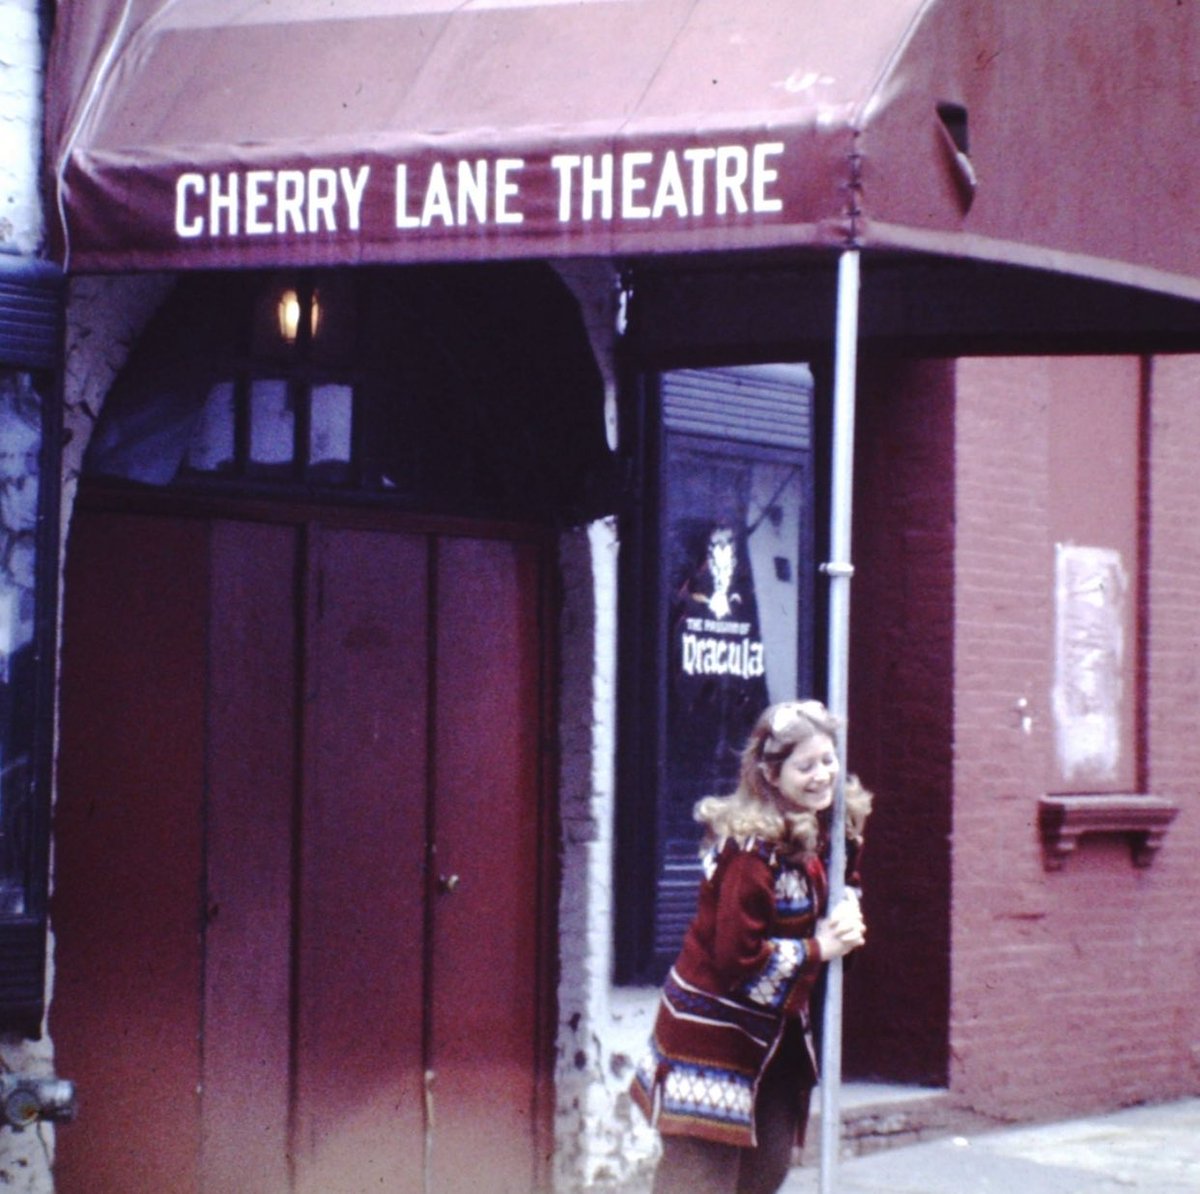 🍒 An autumn day in 1977 #NYC! A #CherryLanetheatre intern working on the production, #PassionofDracula poses for the camera. 42 years later - our interns still like to hang out under that canopy! ☺️ We would love to hear your stories of Cherry Lane in the #1970s!🕺🏻 📸nyartsprog